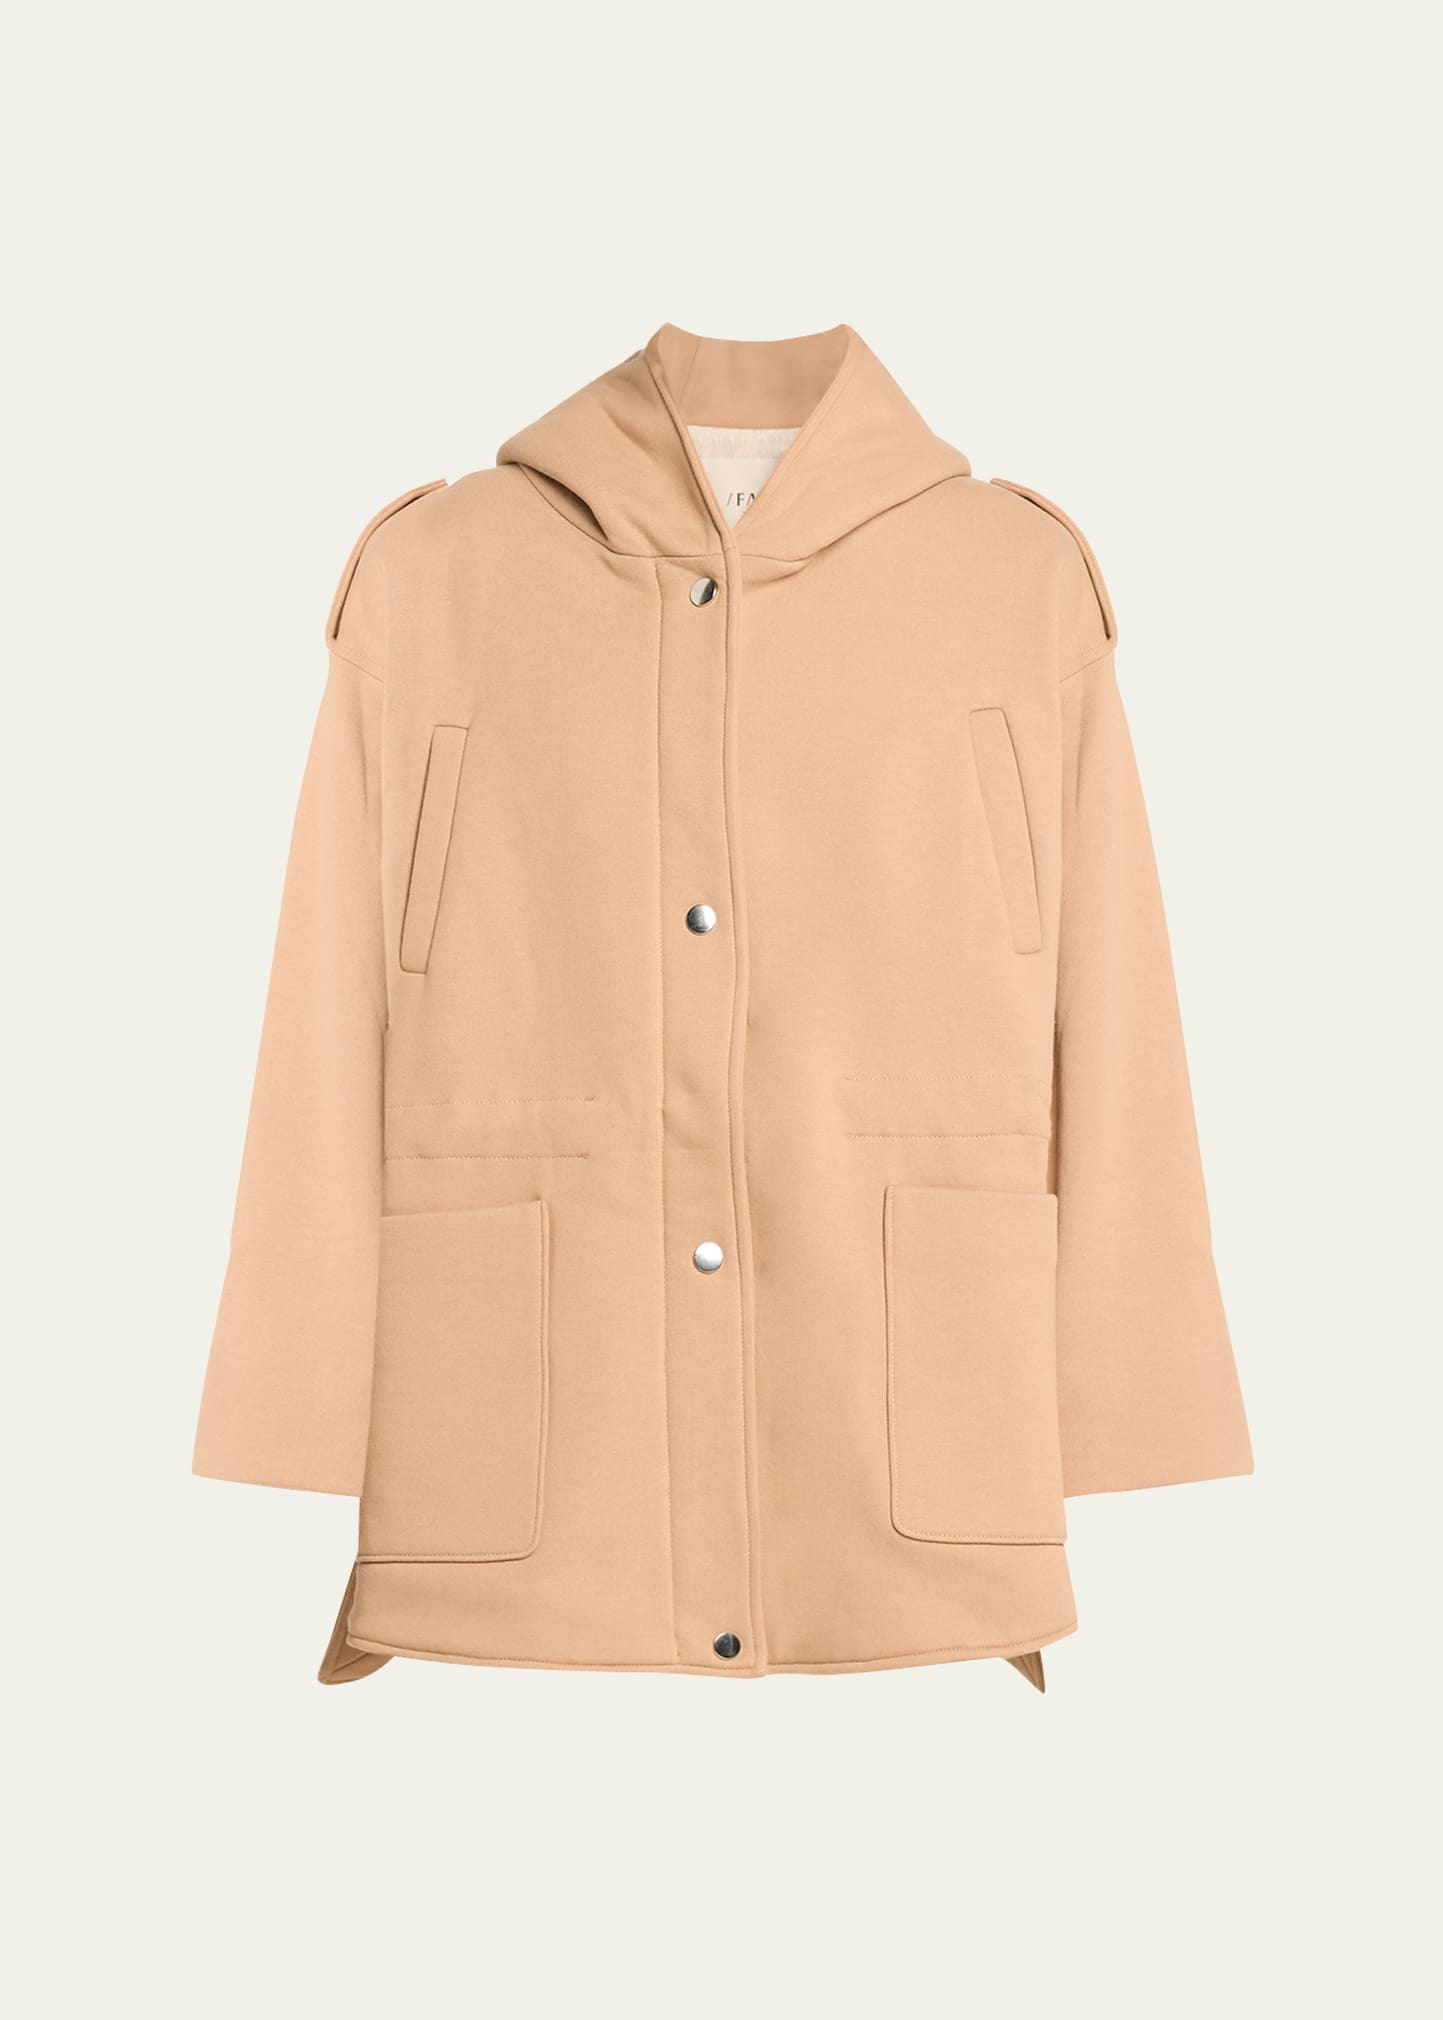 Ruby Hooded Top Coat with Drawcord Waist